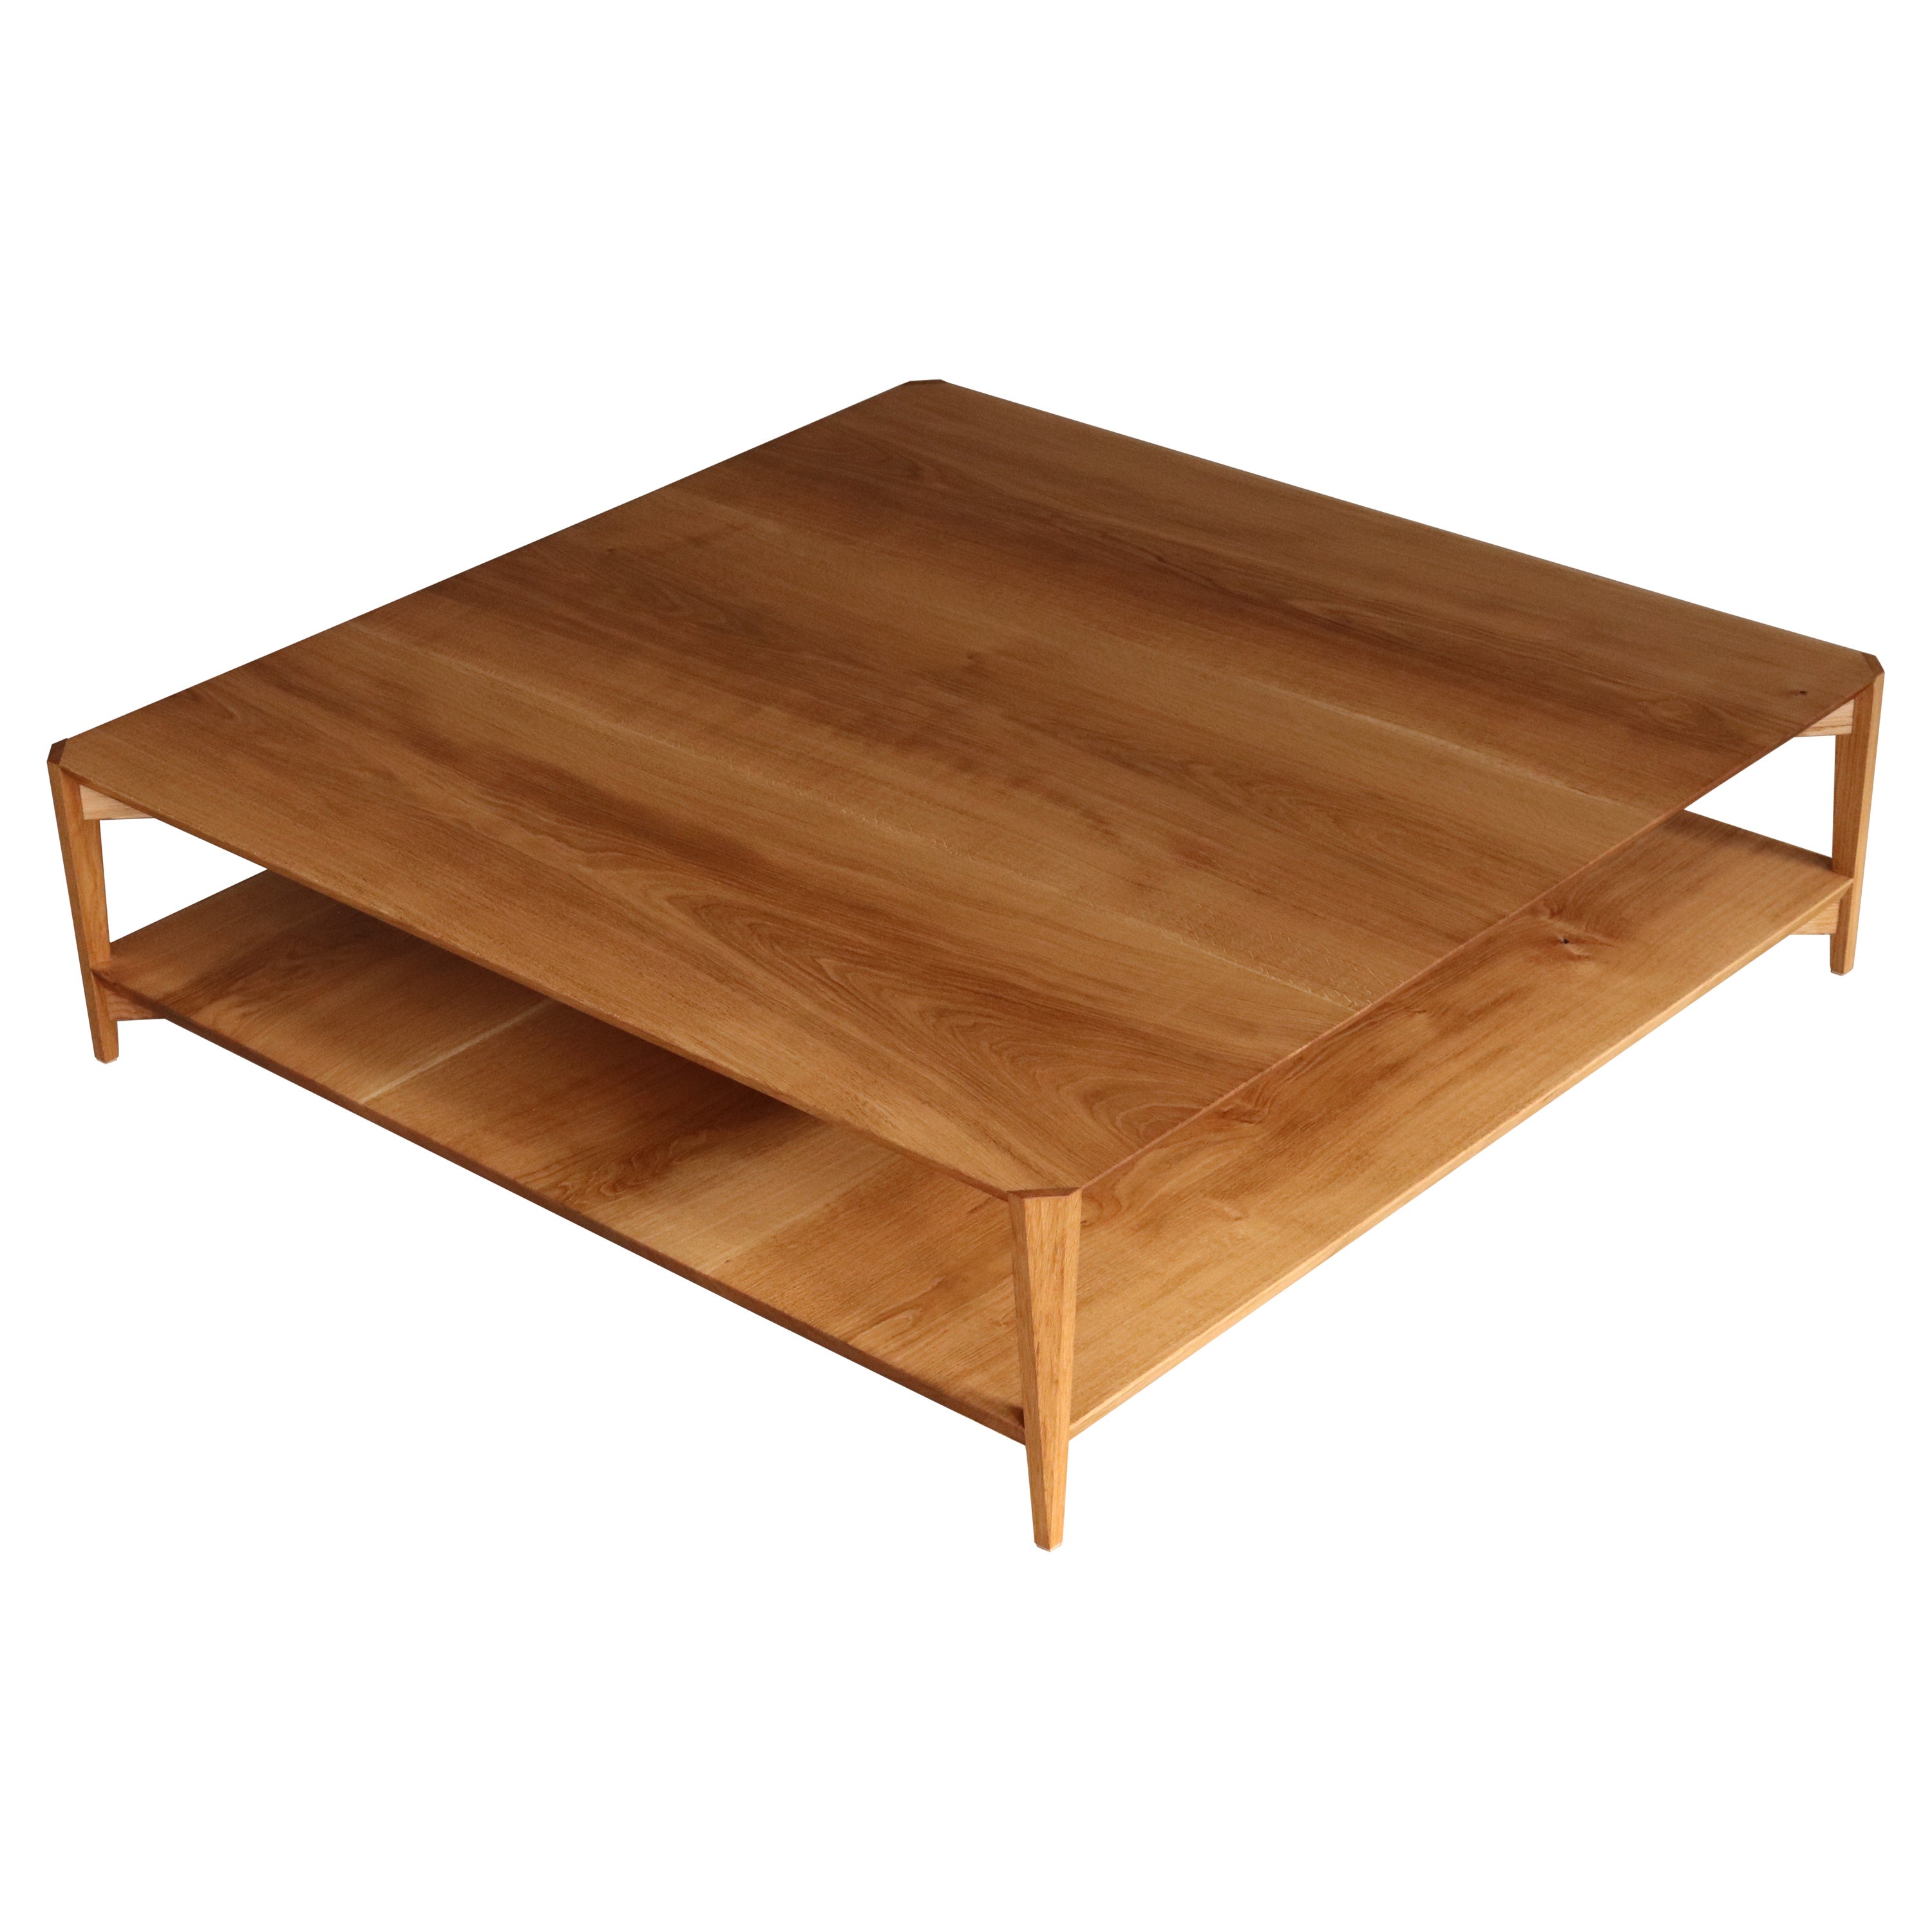 AG Coffee Table, Solid Oak, Handmade and Designed by Tomaz Viana For Sale